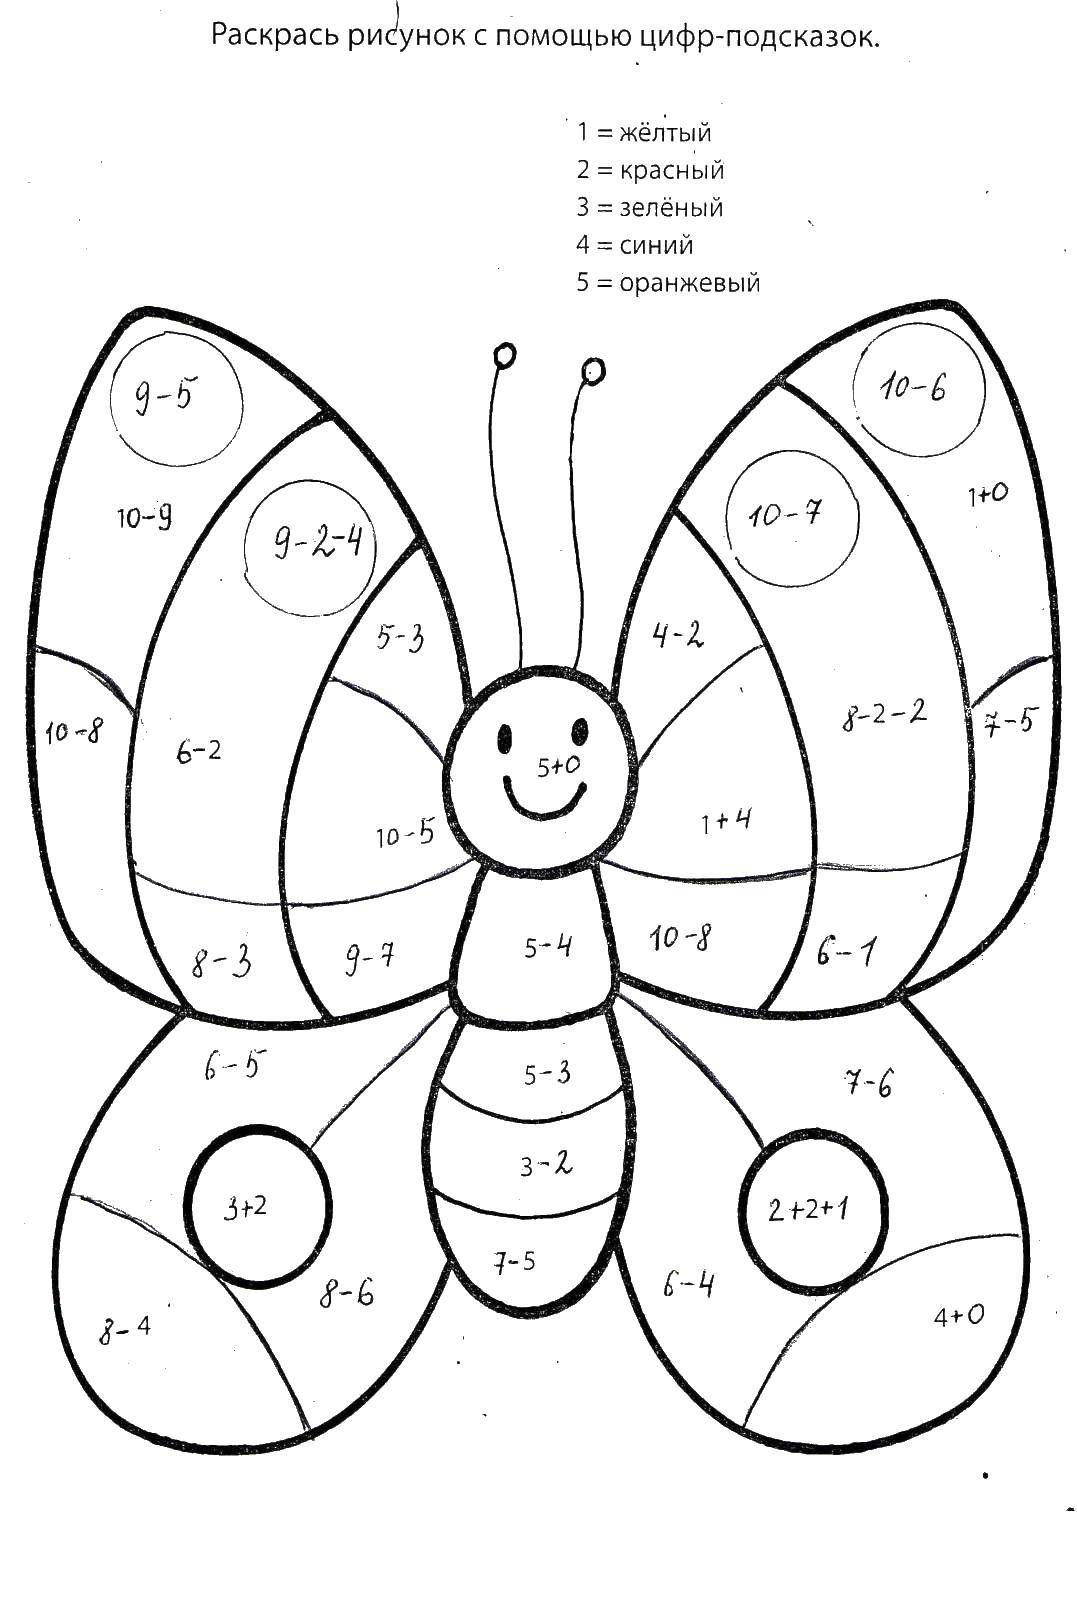 Coloring Solve examples and coloring the butterfly by number. Category mathematical coloring pages. Tags:  examples, picture, math, butterfly.